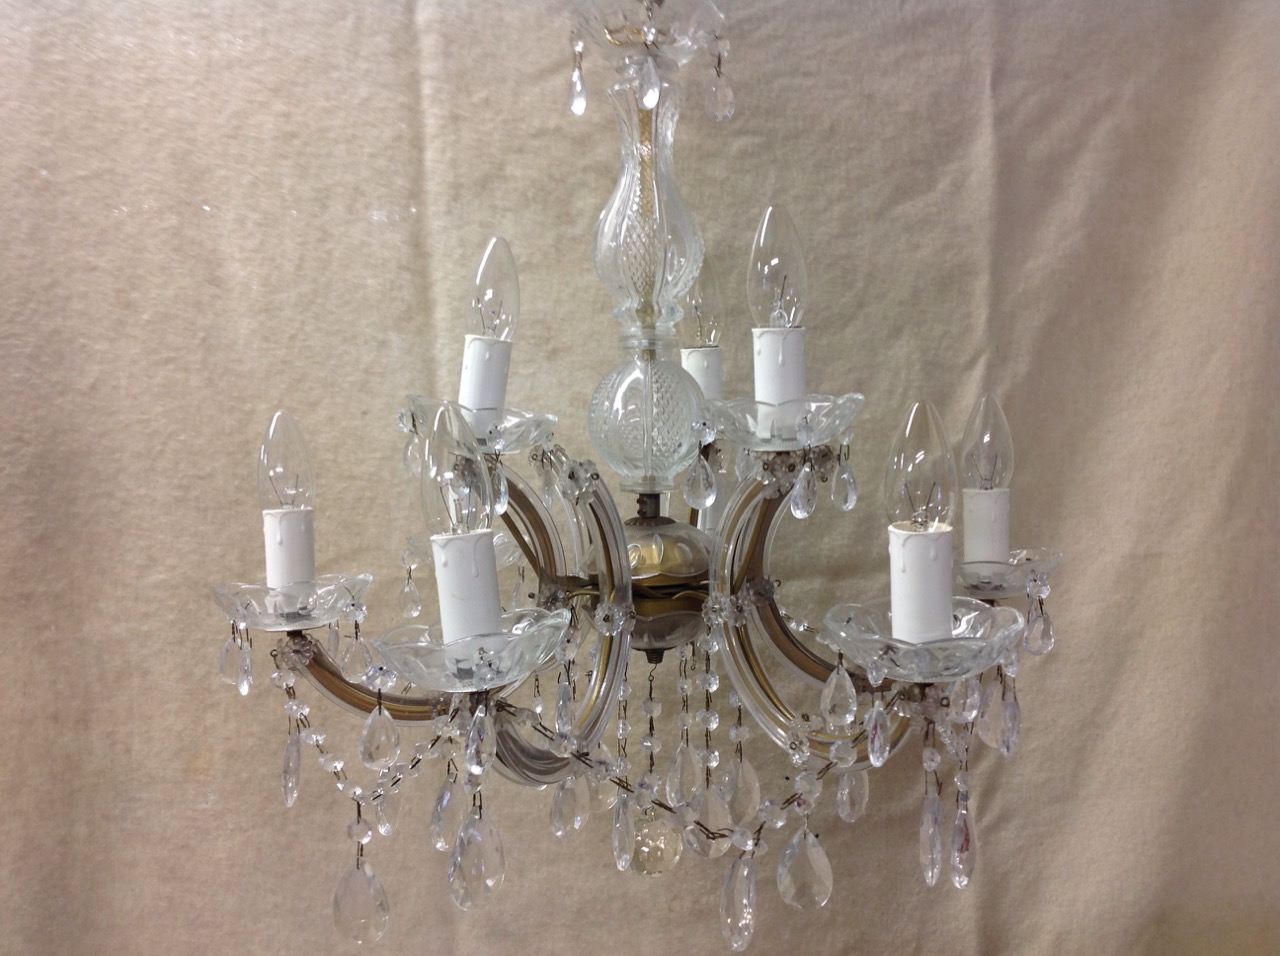 A glass chandelier with five branches around a fluted column, hung with glass drops and bead swags.